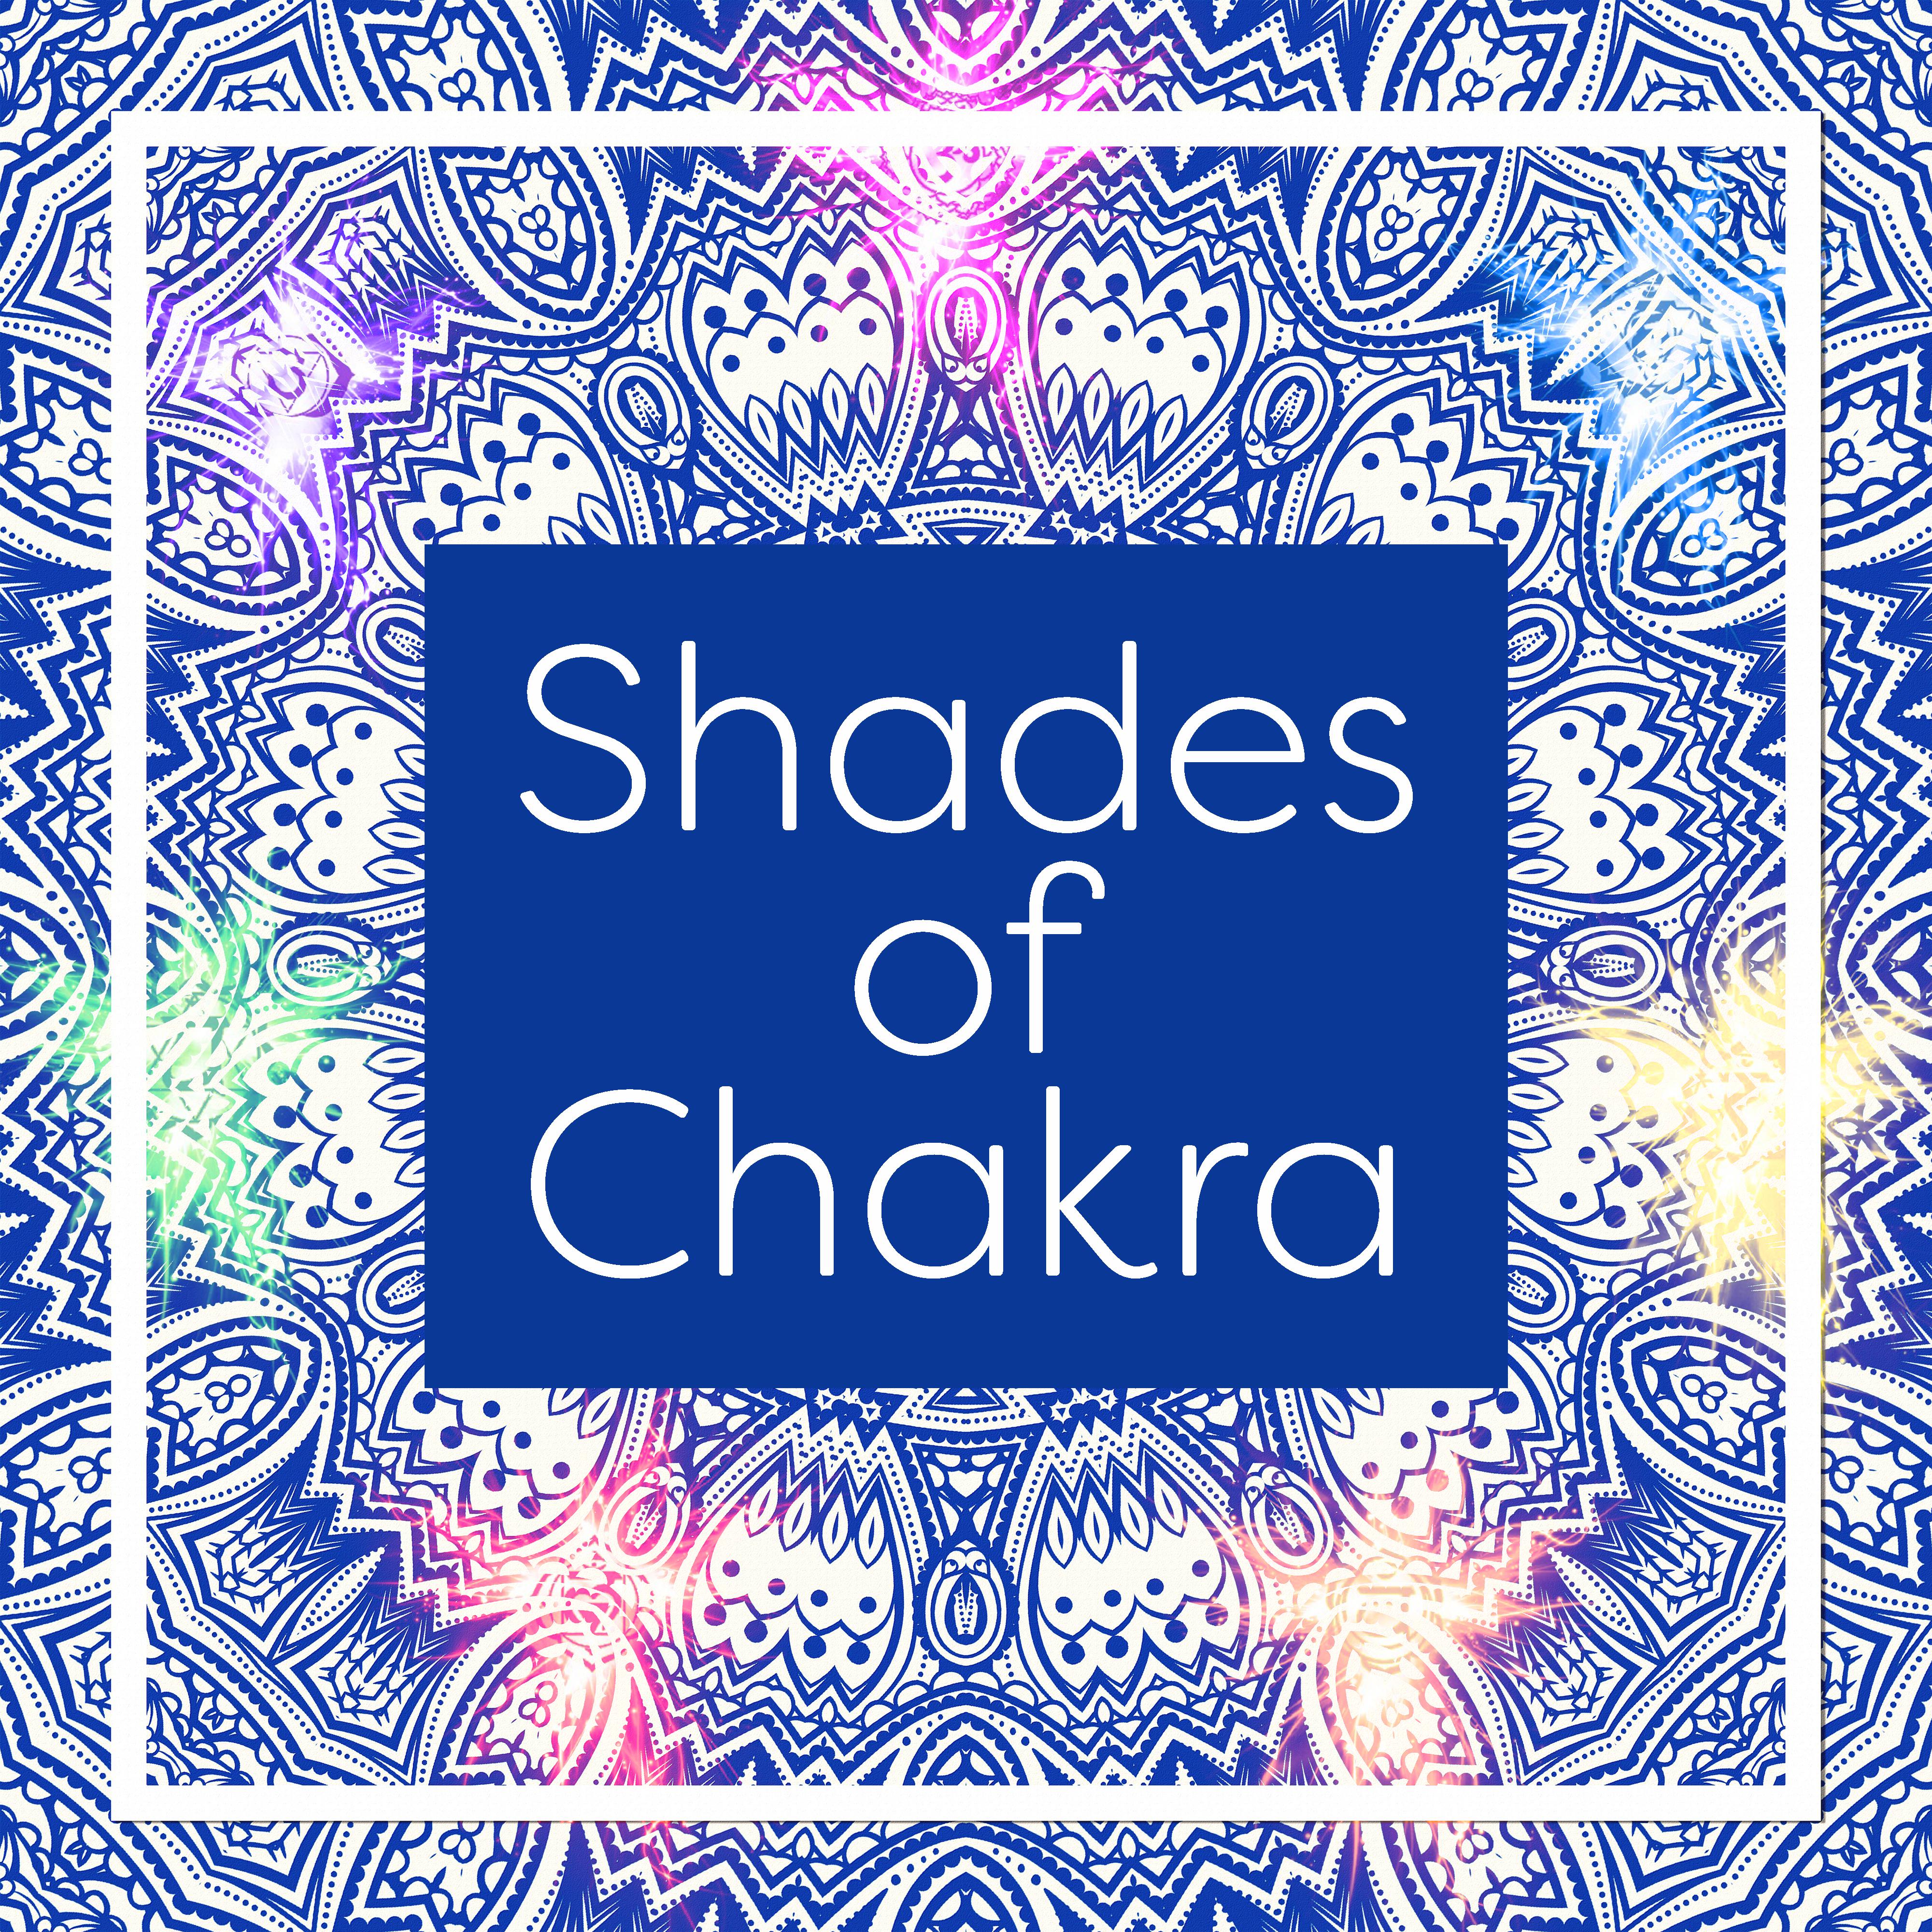 Shades of Chakra  Sounds of Yoga, Meditation Music, Inner Balance, Asian Zen, Relax, Pure Mind, Soothing Music for Yoga